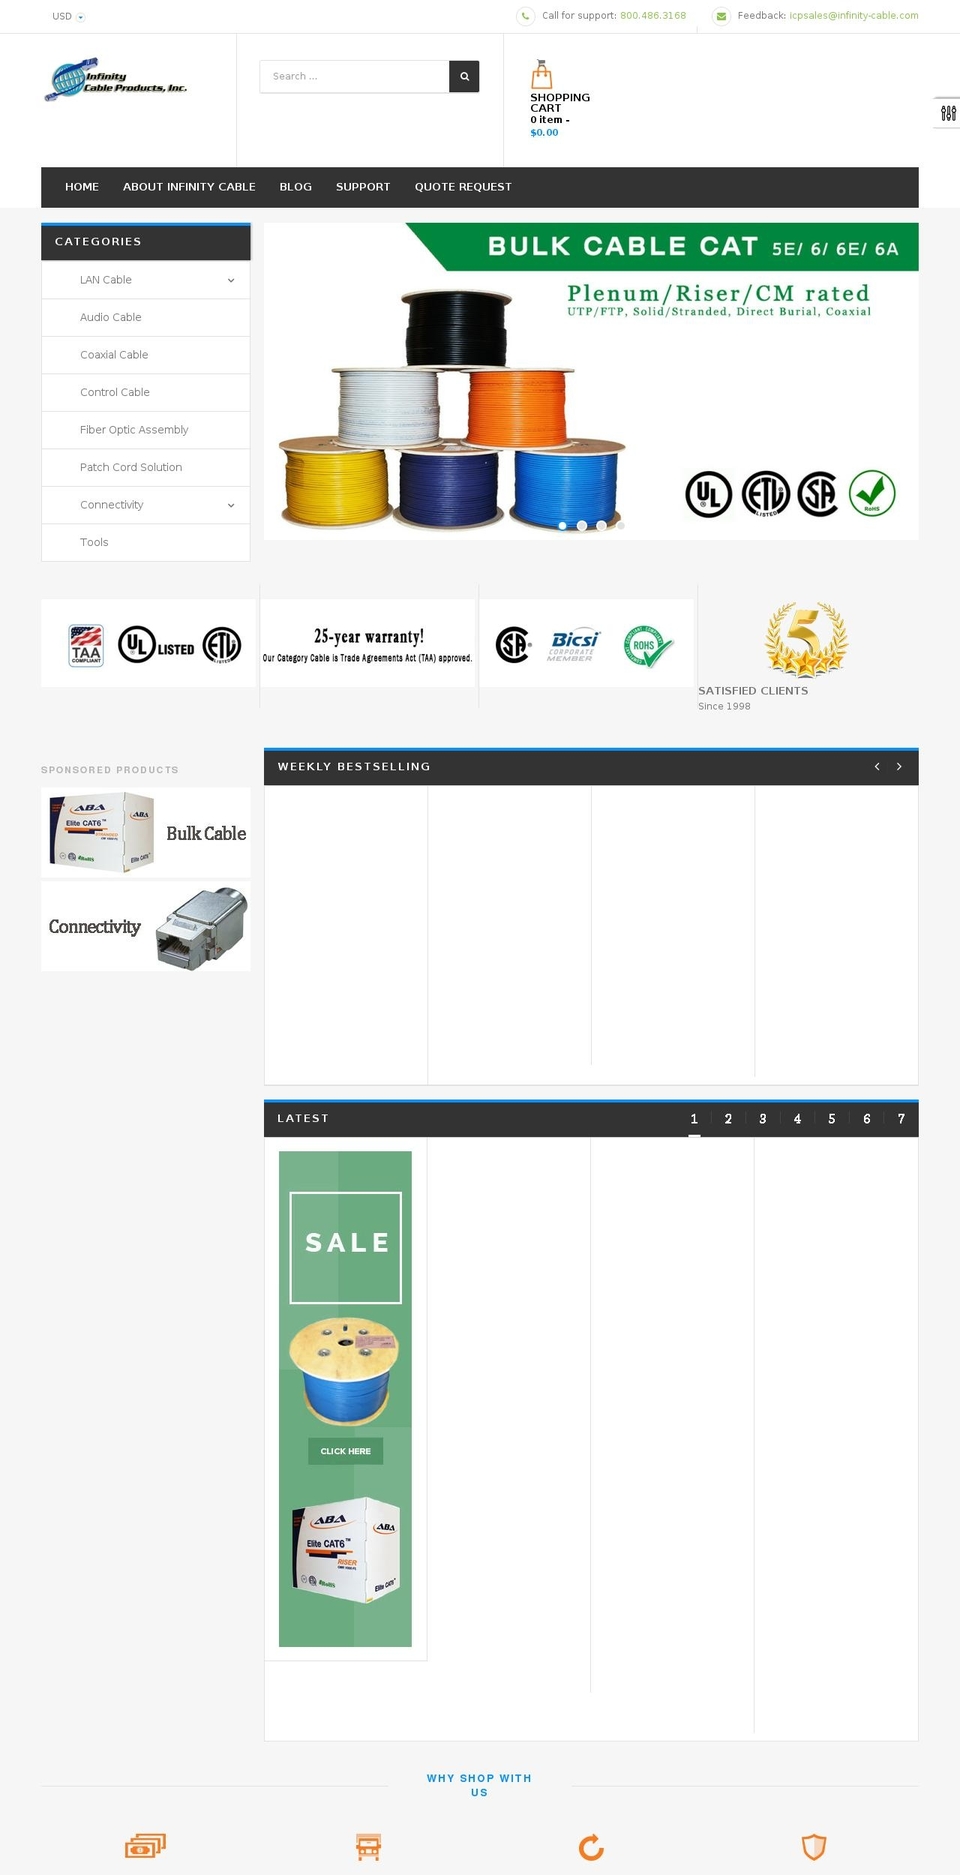 infinity-cable-products.com shopify website screenshot